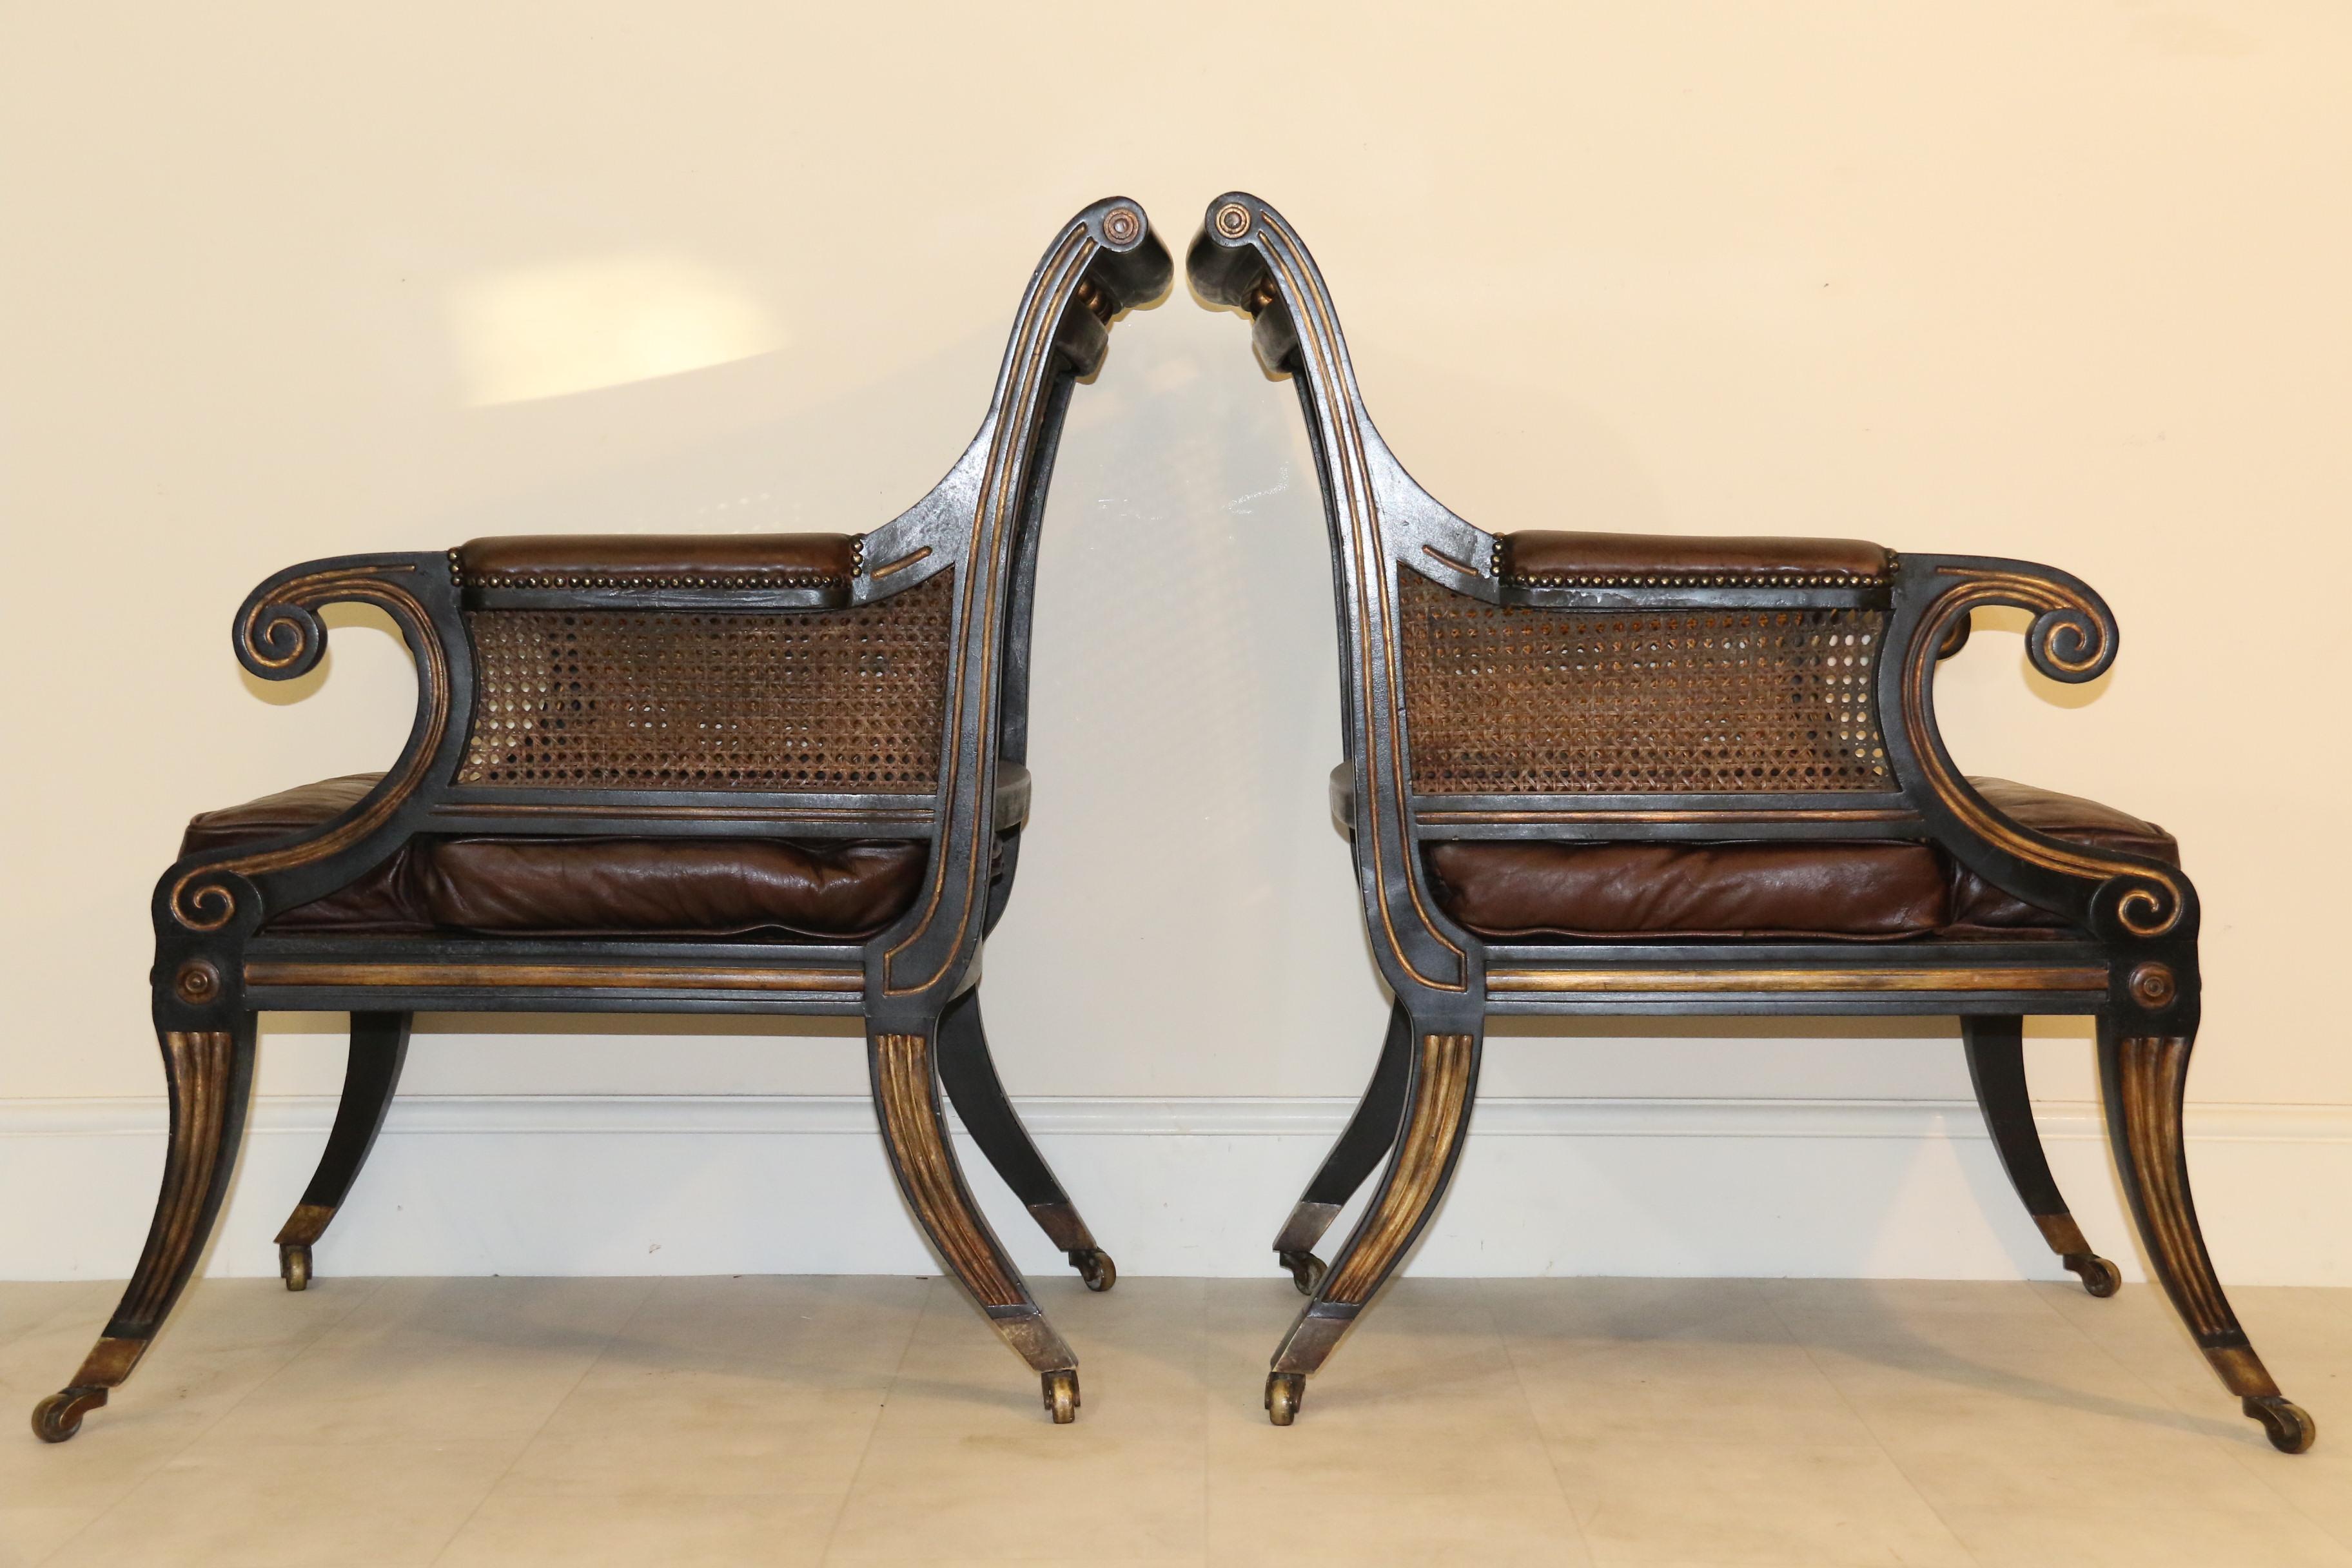 Mahogany Pair of English Regency Style Ebonized and Gilt Library Chairs For Sale